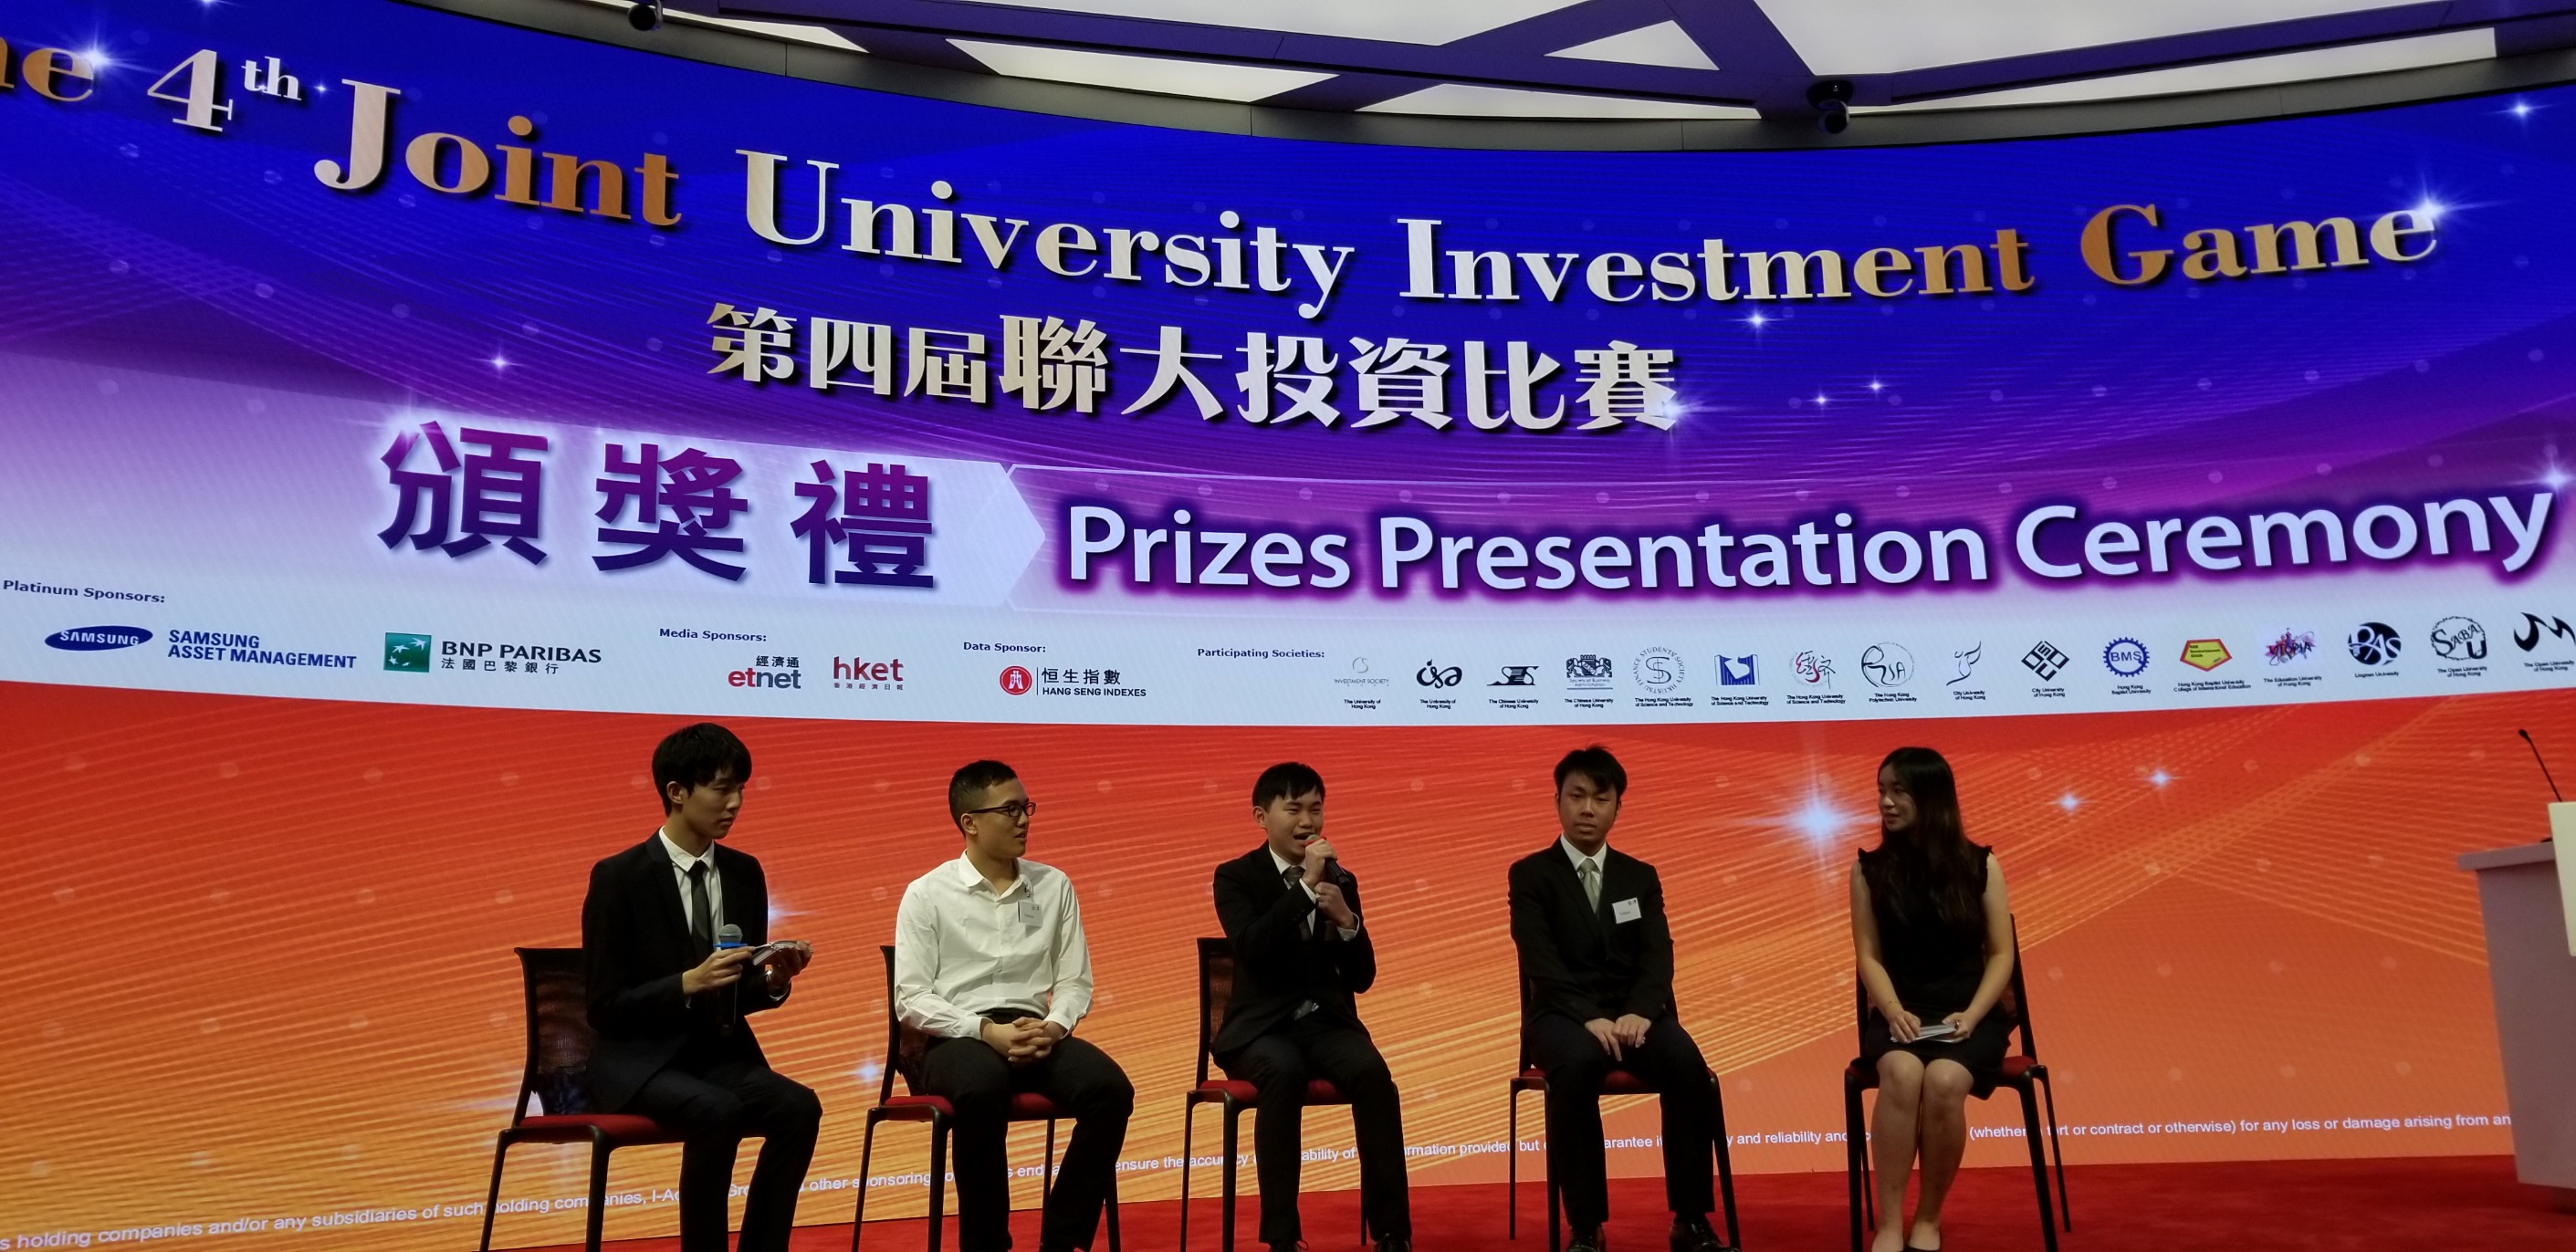 Winners shared their investment strategies at the Prize Presentation Ceremony.